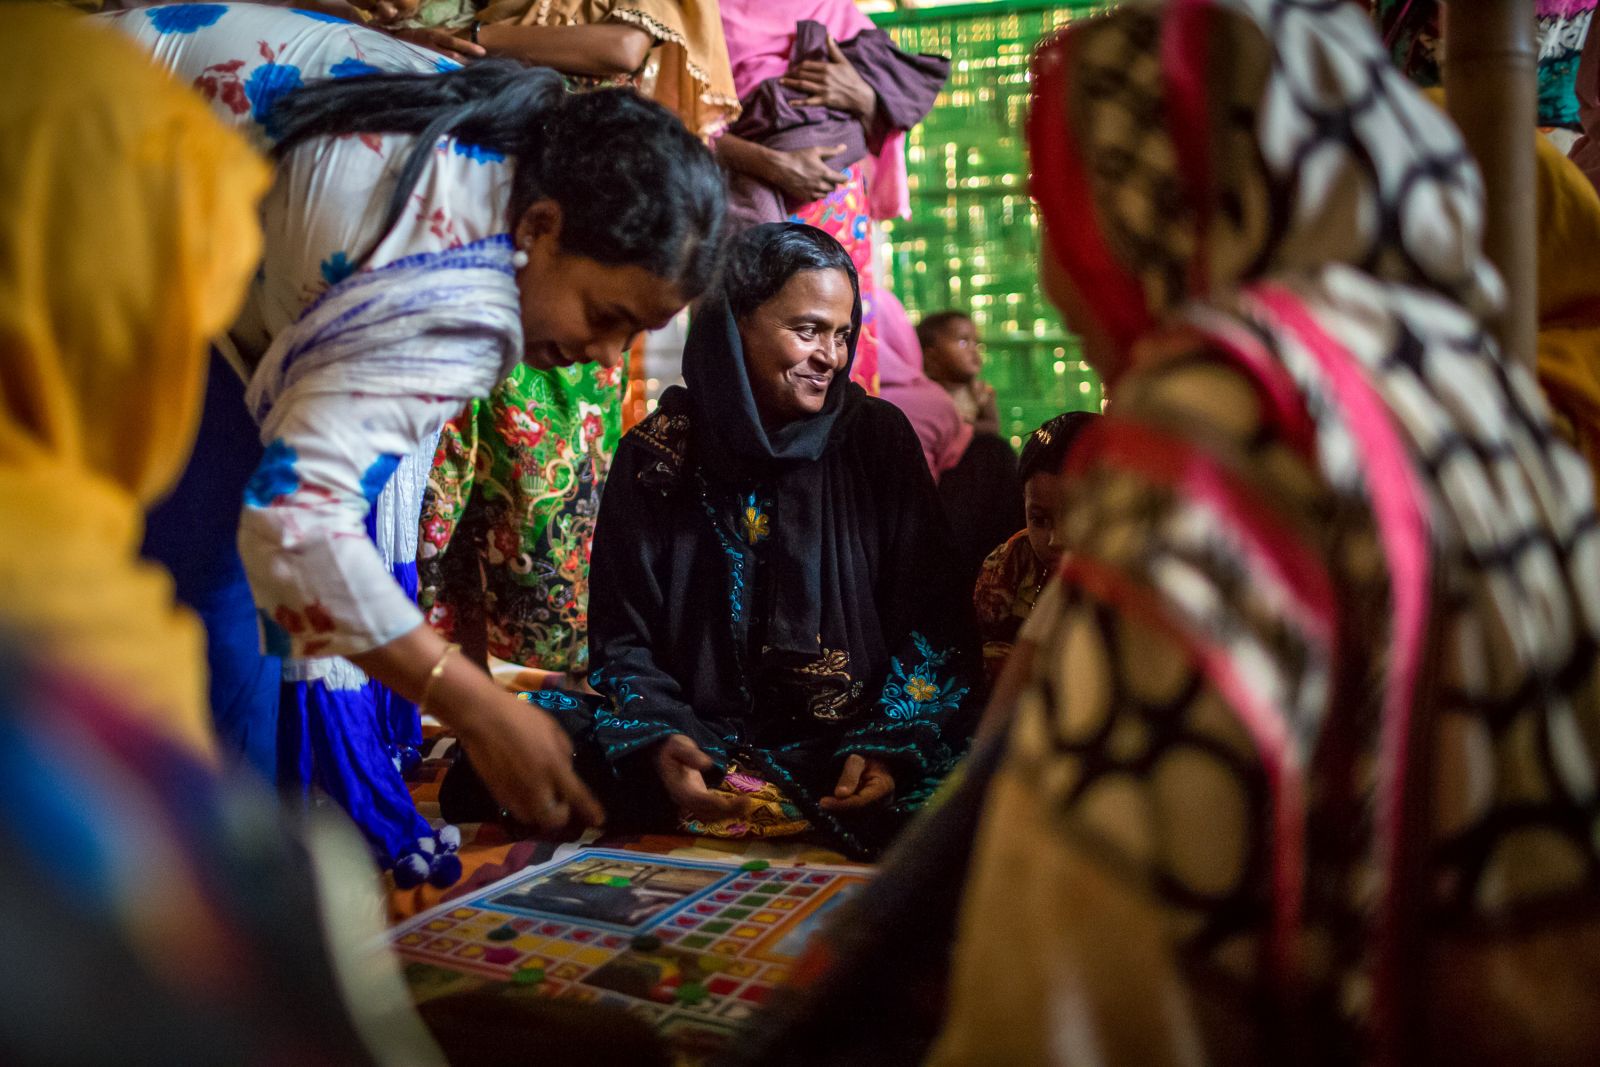 In Bangladesh, CARE has established Women Friendly Shelters. These are community spaces where women living in refugee camps can relax and share with each other. Photo: Nancy Farese/CARE